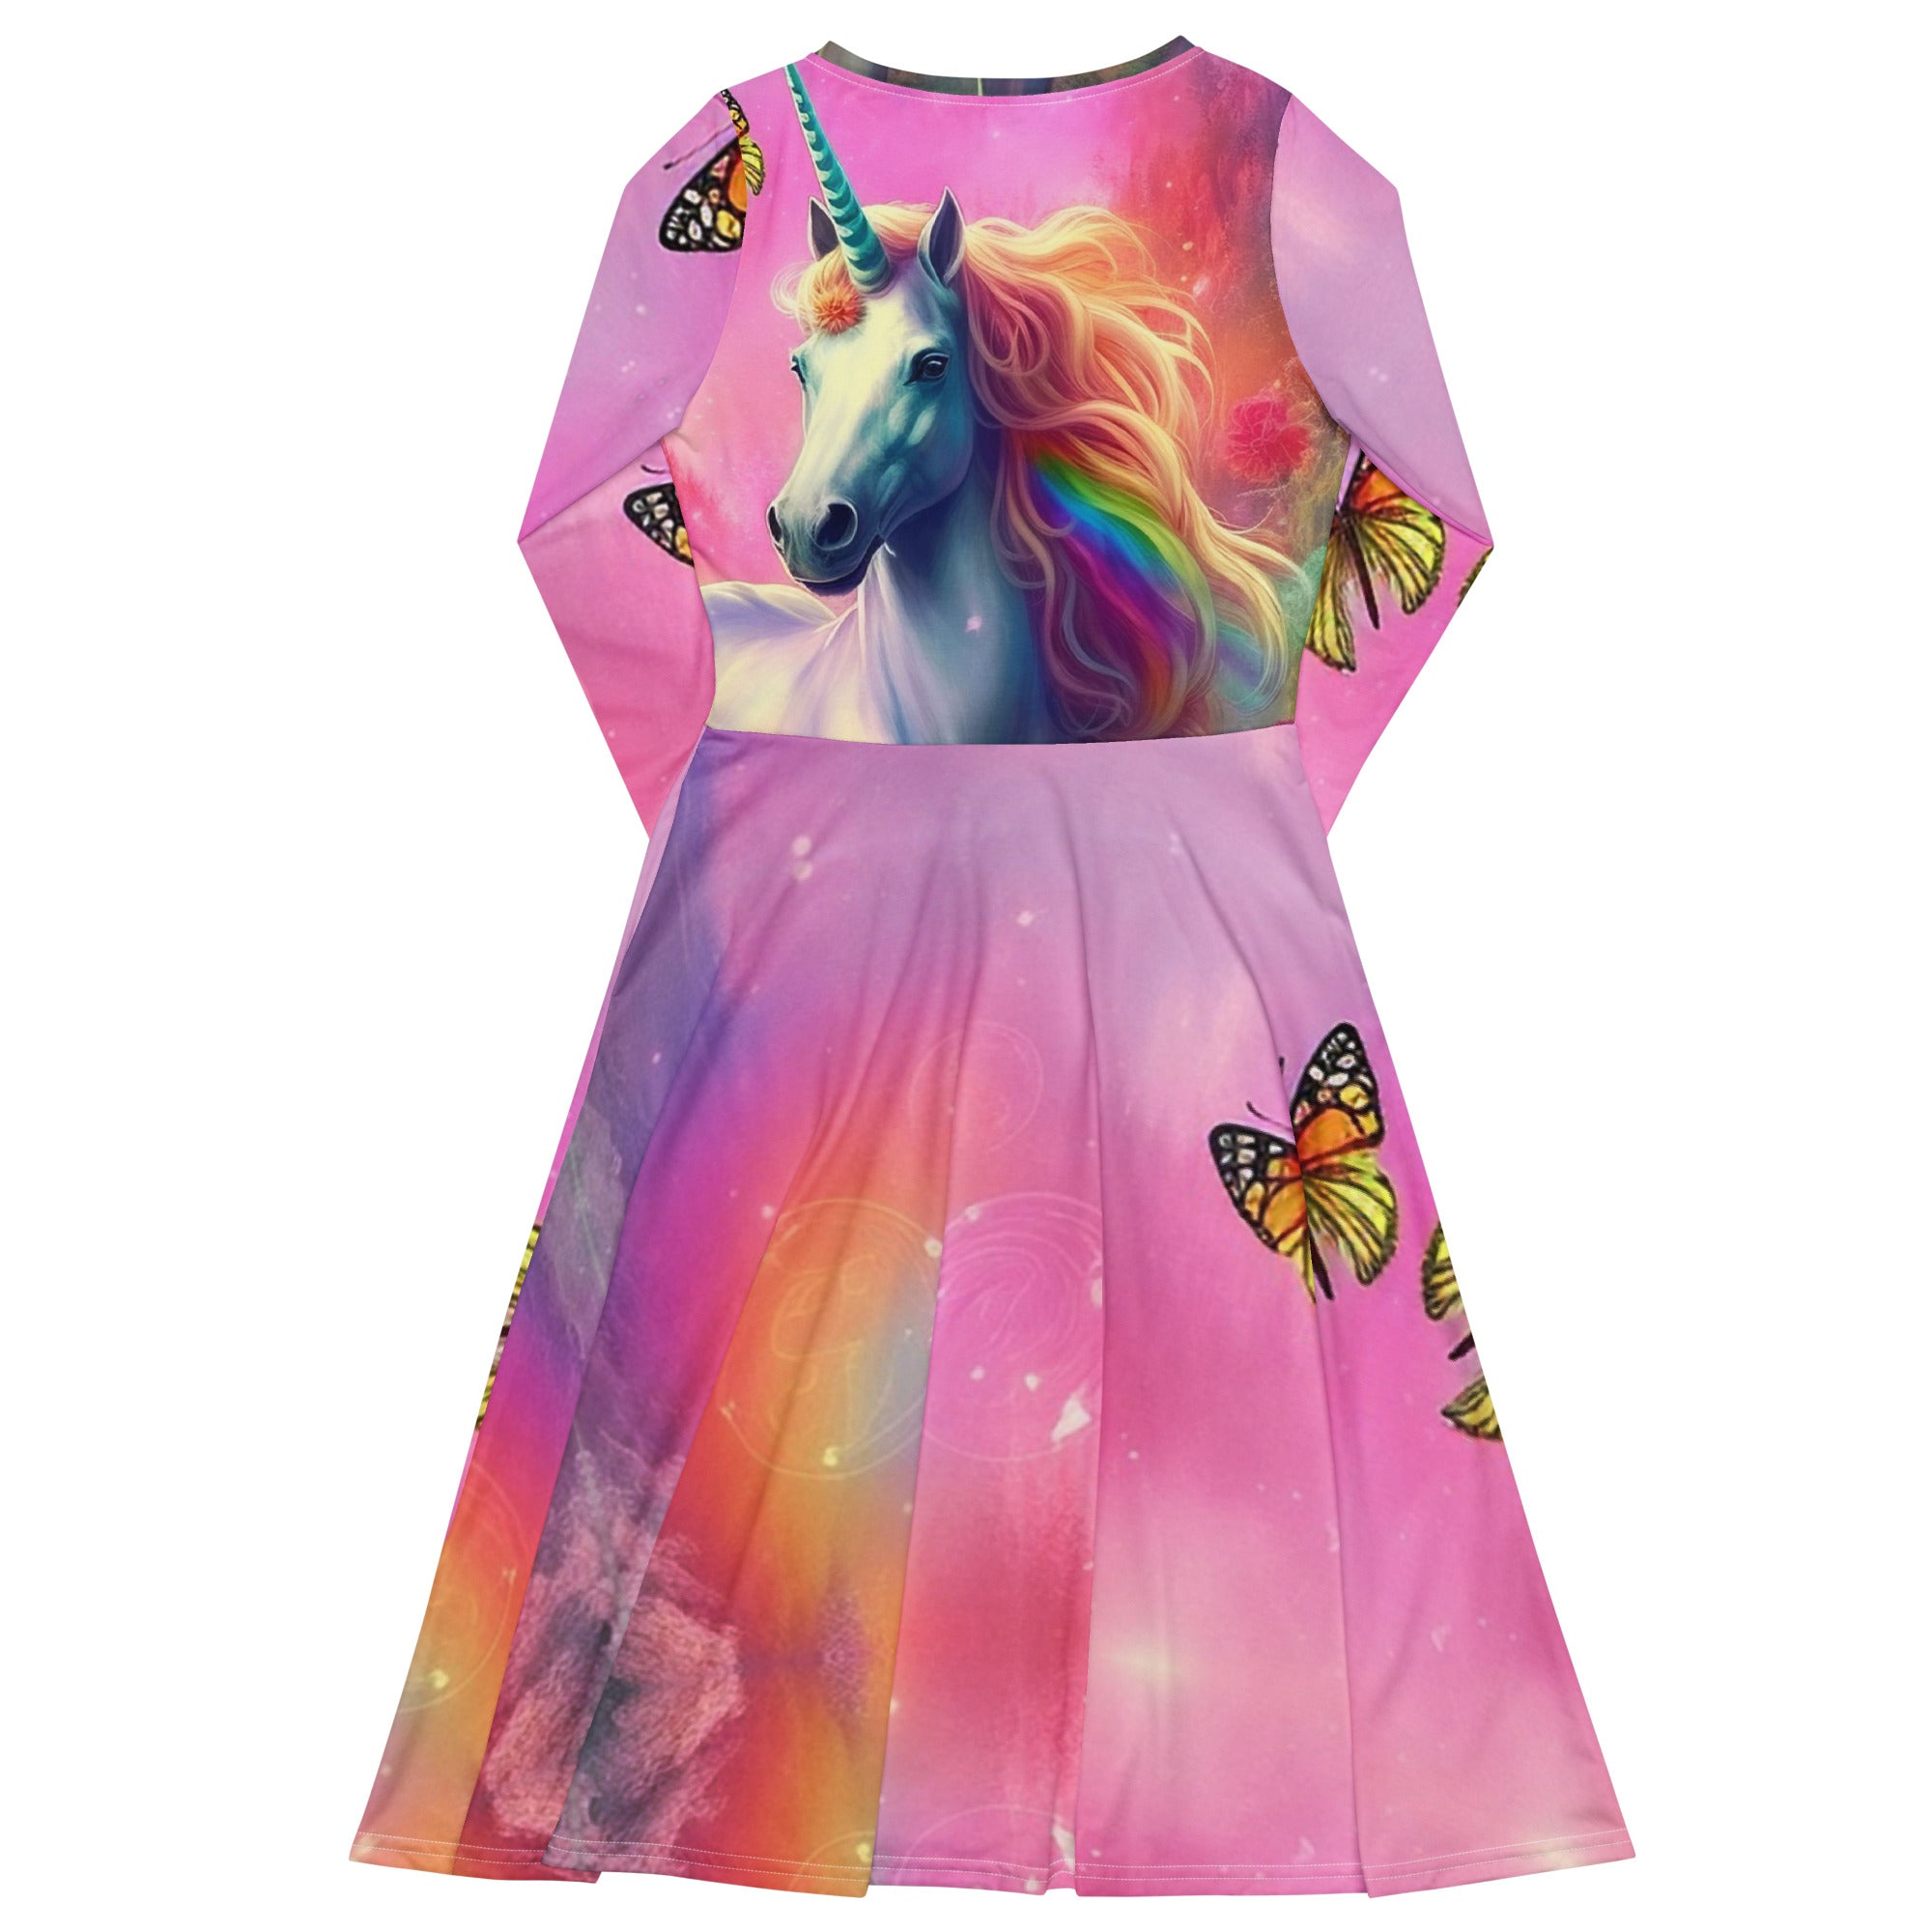 Captivate Hearts and Turn Heads: Radiate Elegance in our Unicorn and Butterflies Dress